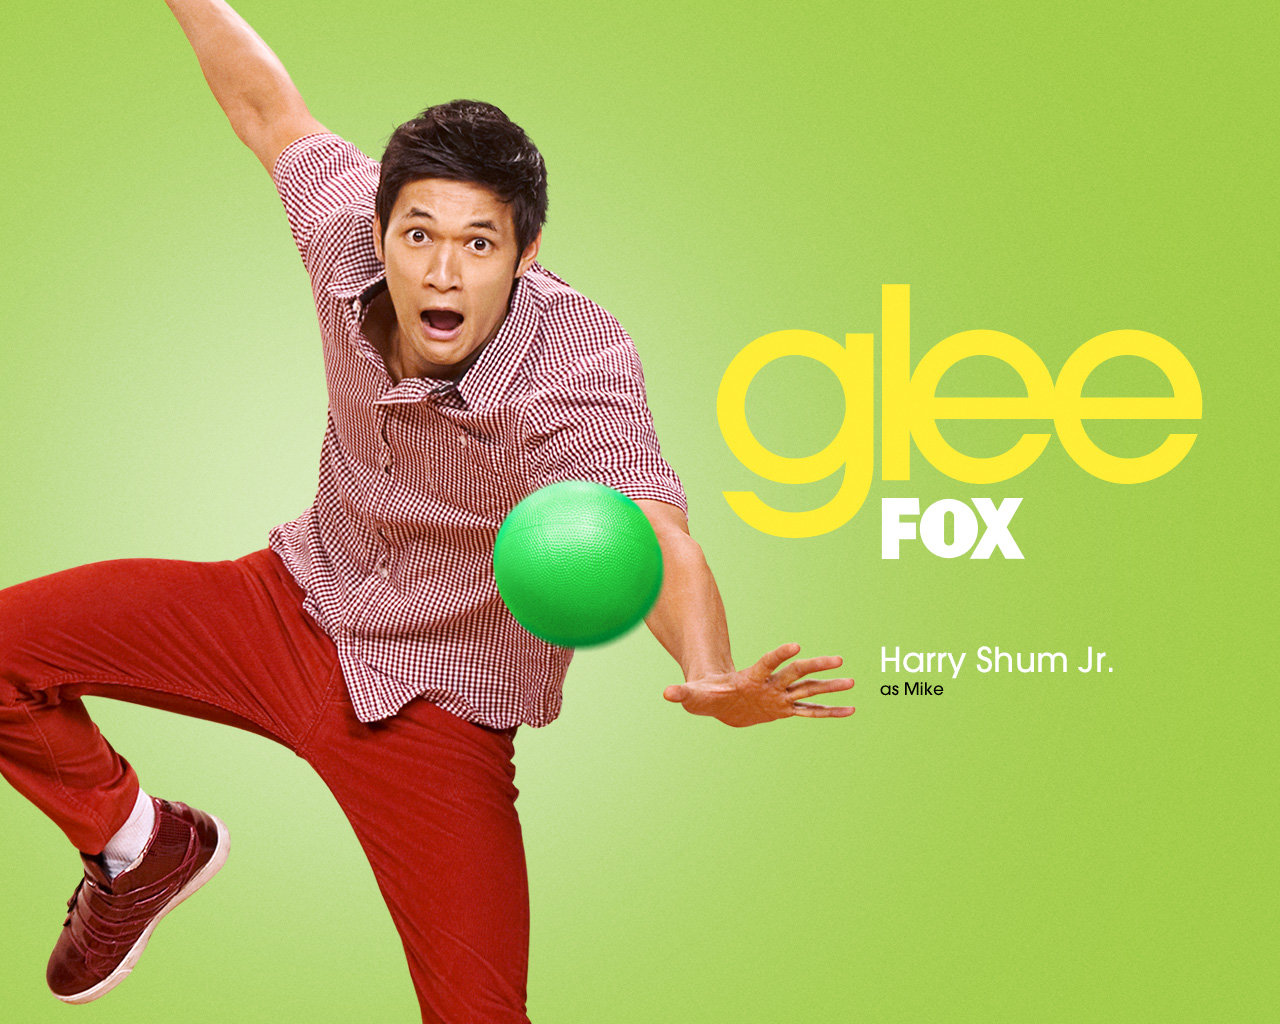 Download hd 1280x1024 Glee computer background ID:269961 for free